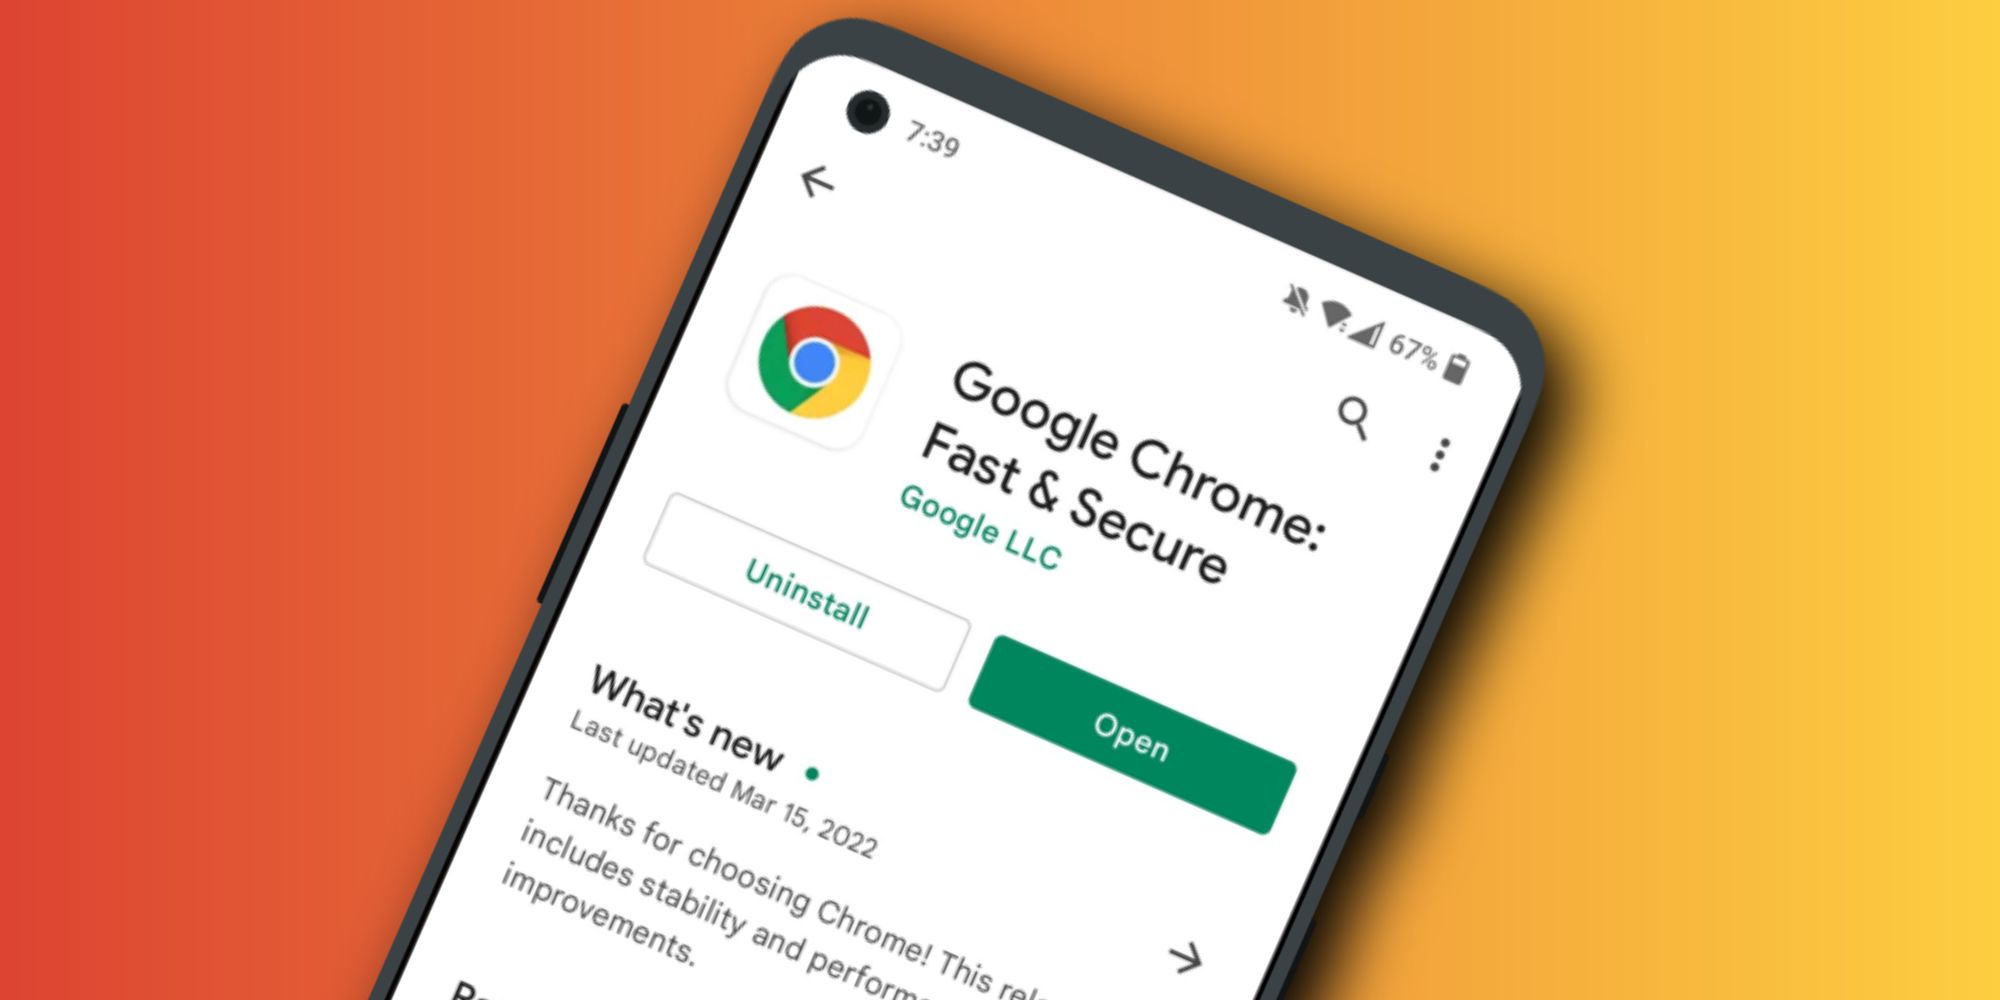 Google Chrome Android app on the Play Store